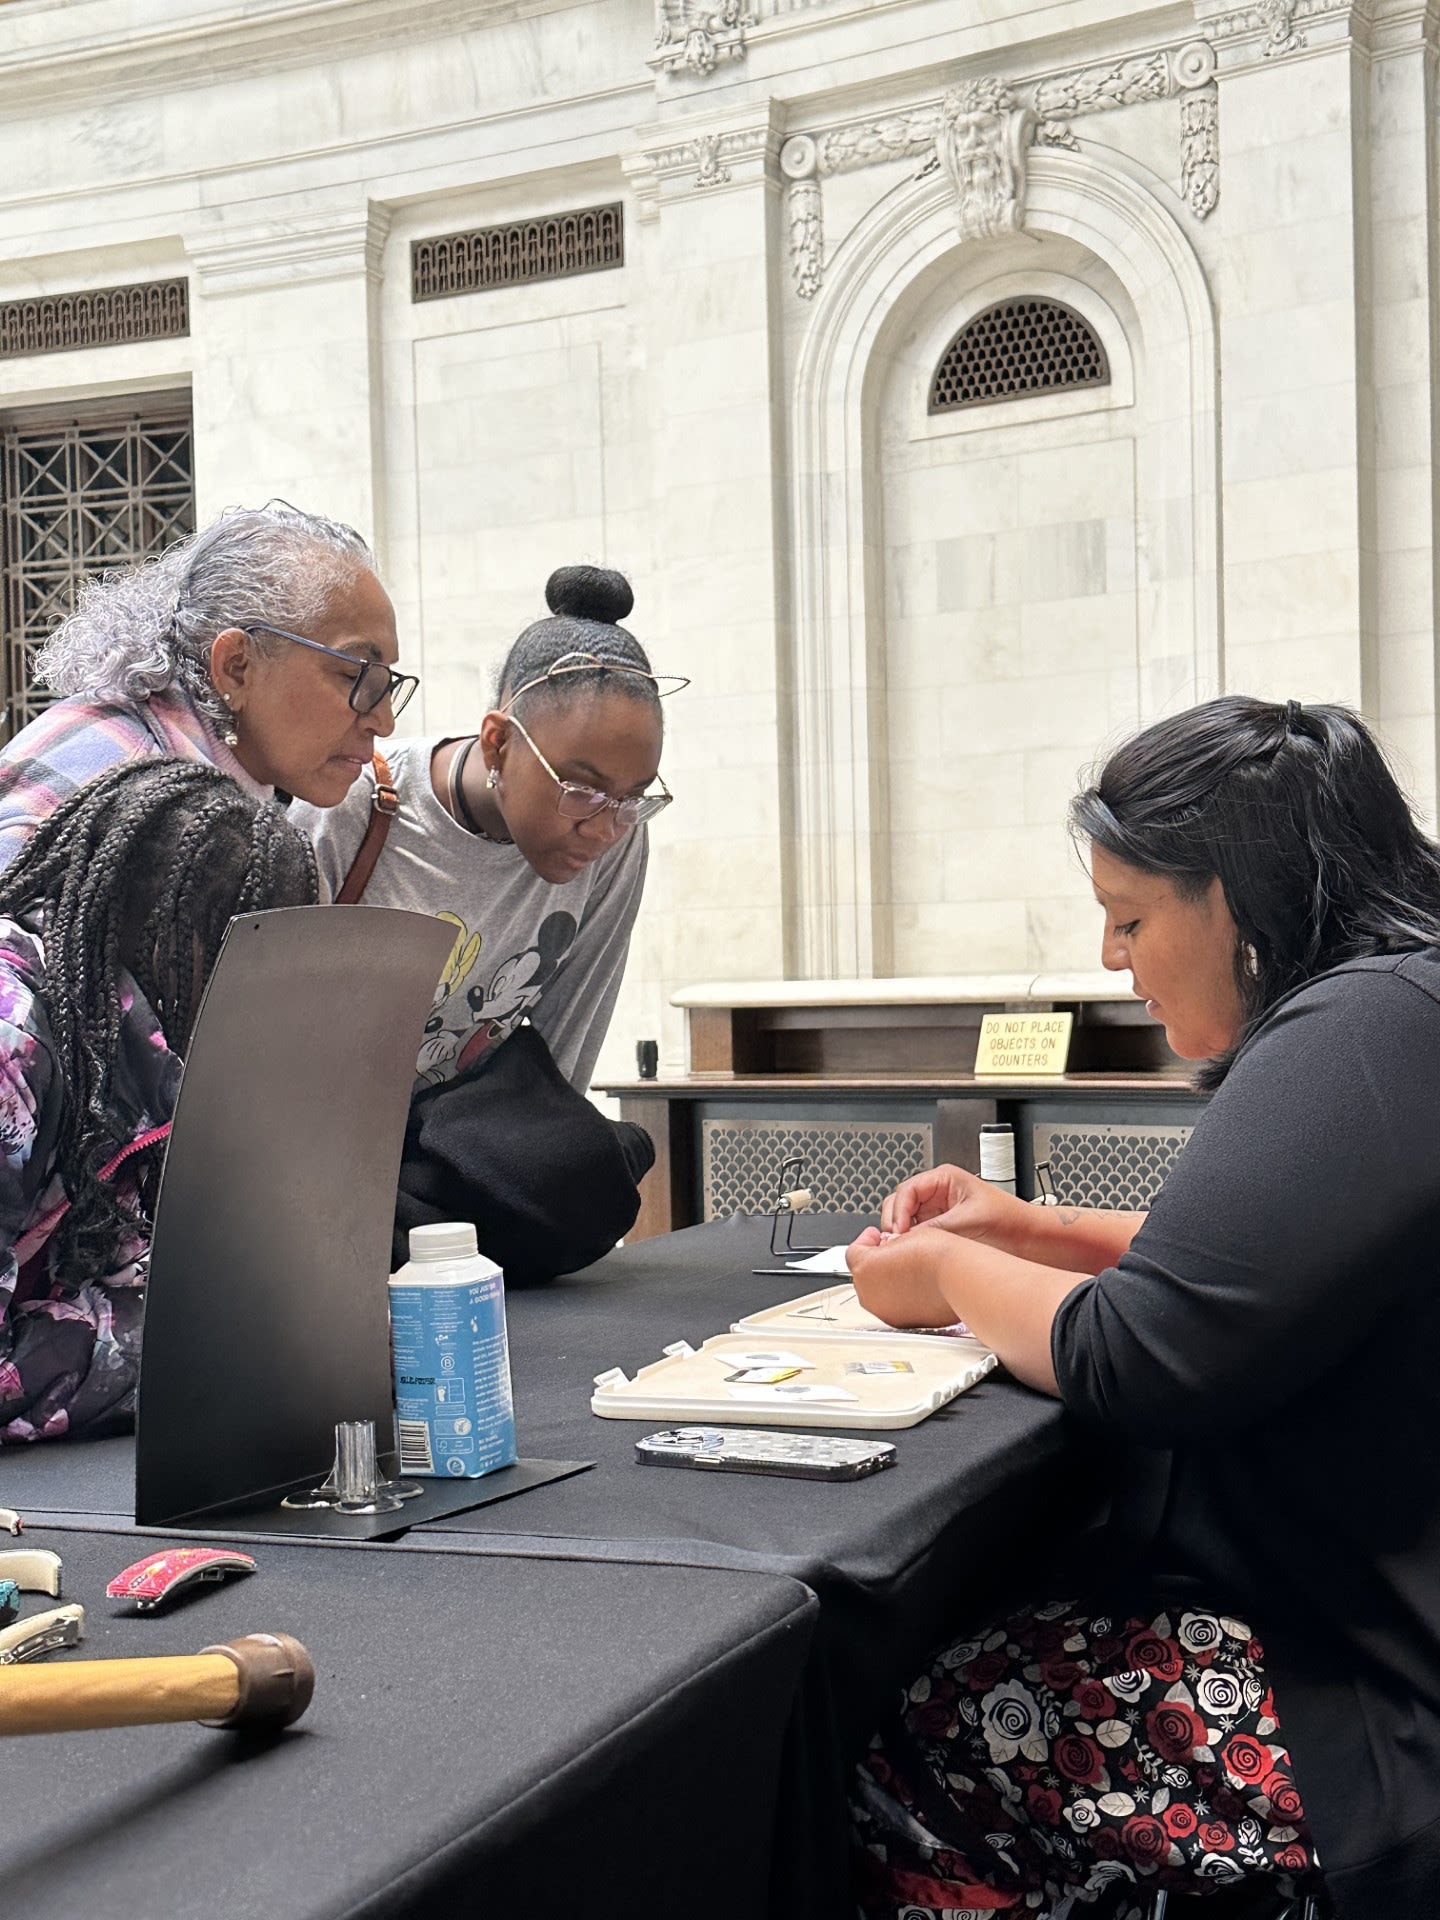 Artist Shares Chickasaw Art, Culture at New York Event